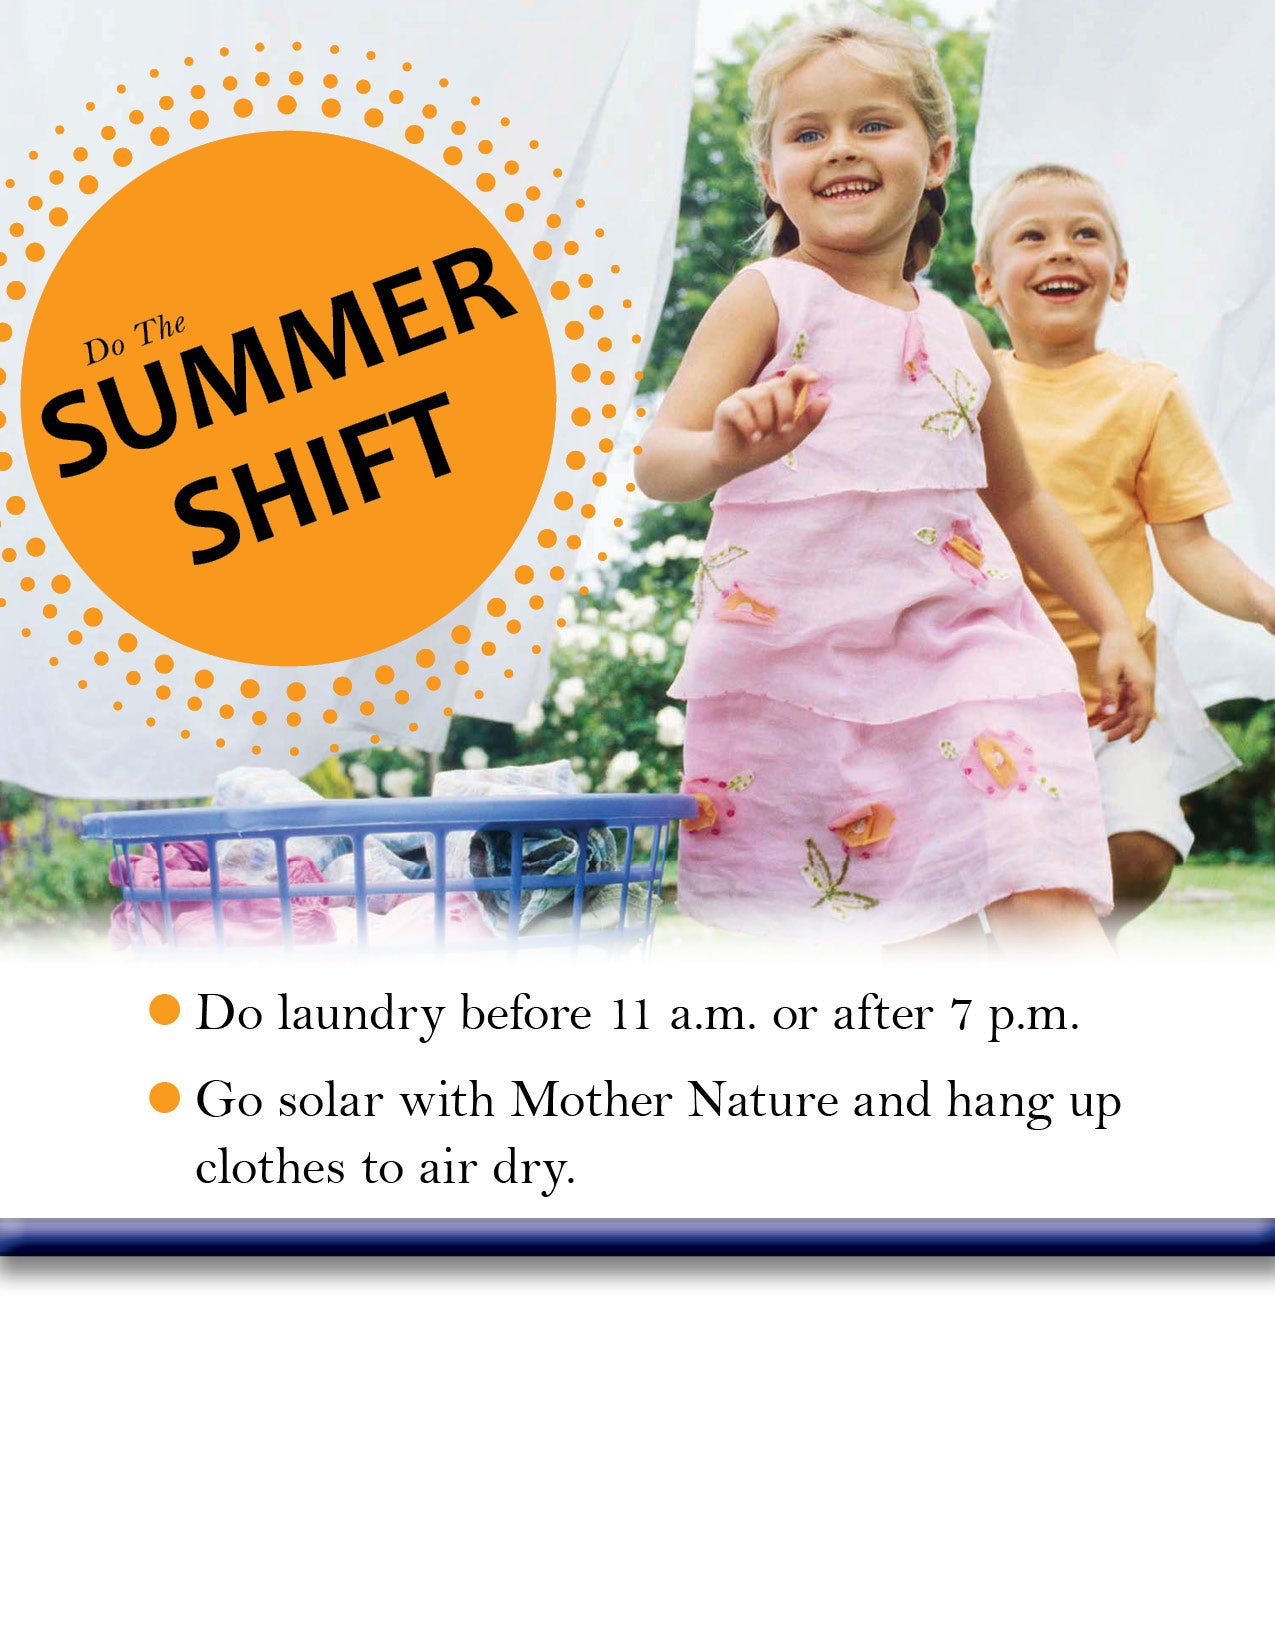 Do the Summer Shift, Wash Laundry Before or After Peak Times, Line Dry